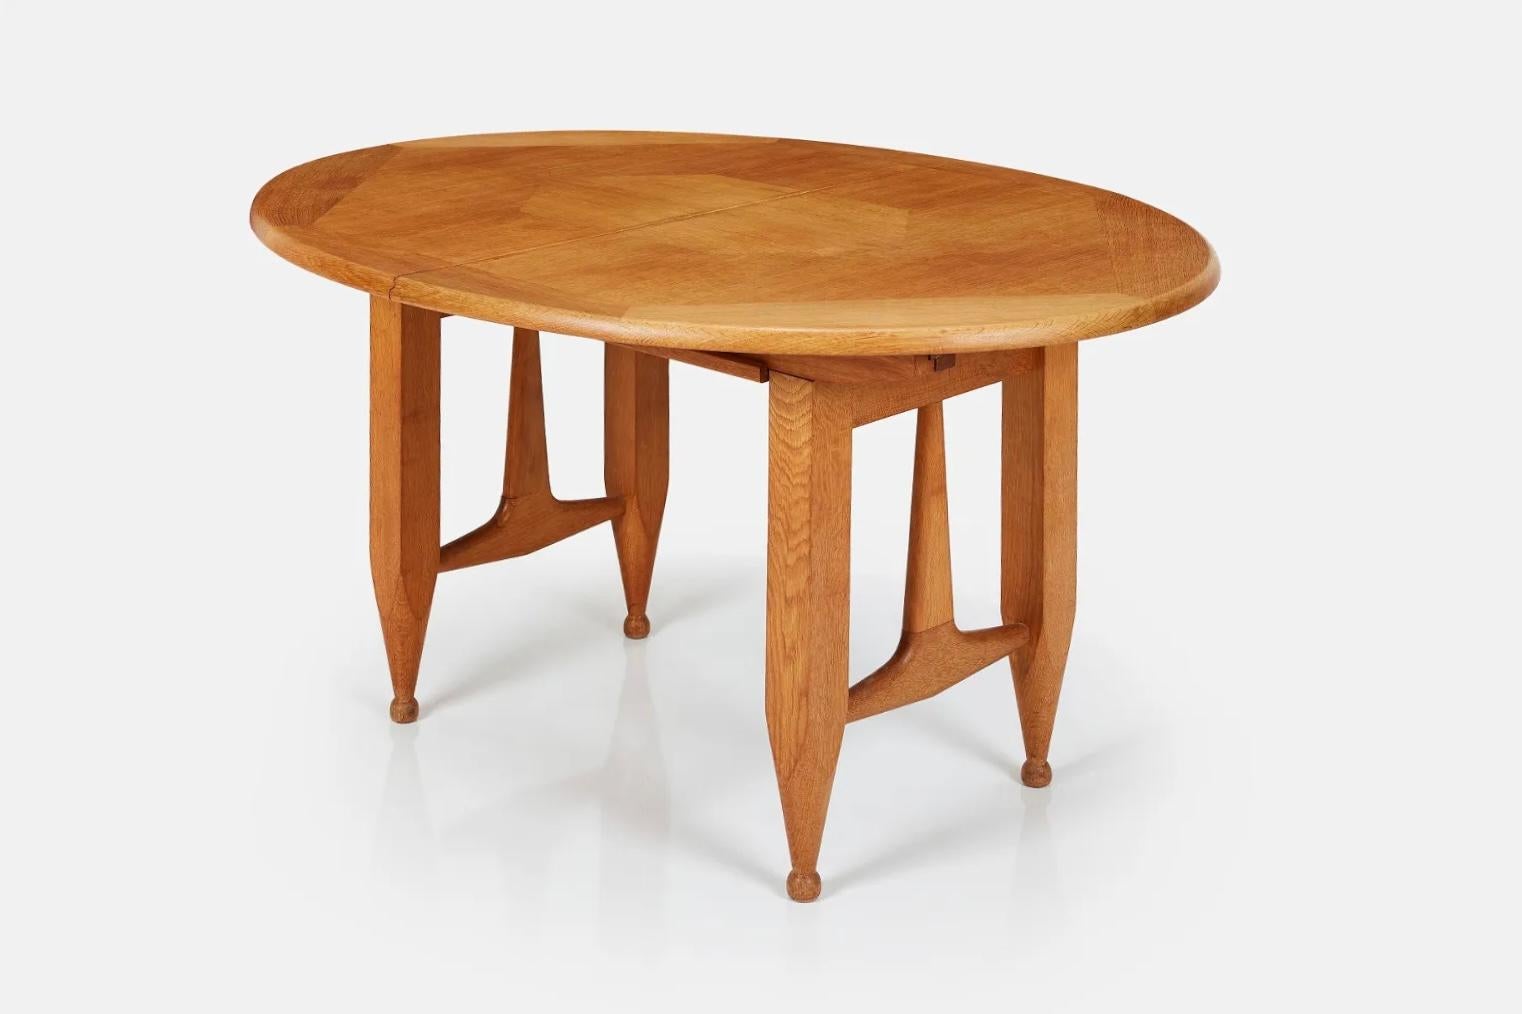 Blond oak center table / extendable dining table by Guillerme & Chambron for Votre Maison.

Robert Guillerme studied design and architecture at the École Boule, graduating in 1934. After the Second World War he moved to Lille, in the north of